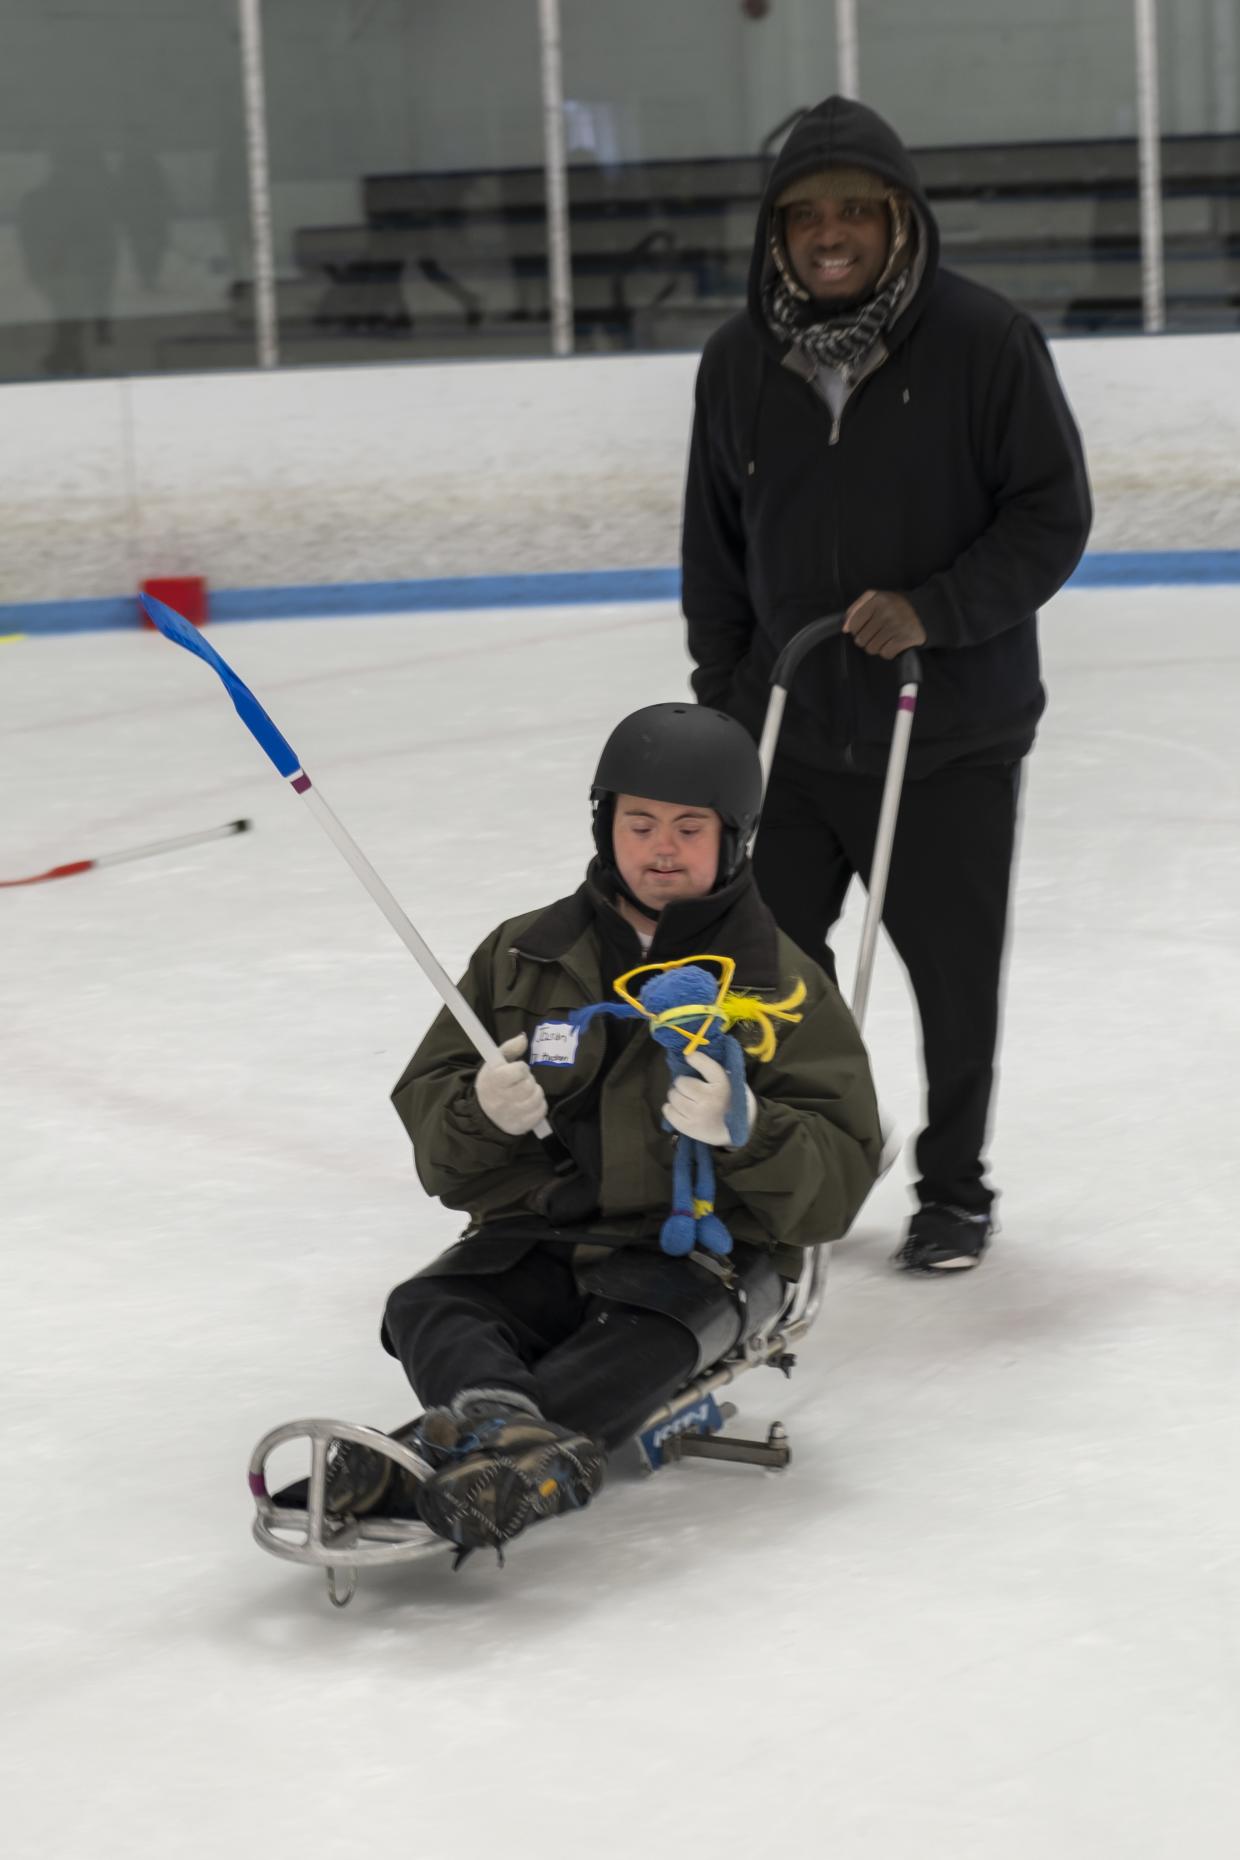 A person in an ice sled is holding a hockey stick and a doll while another person pushes them.